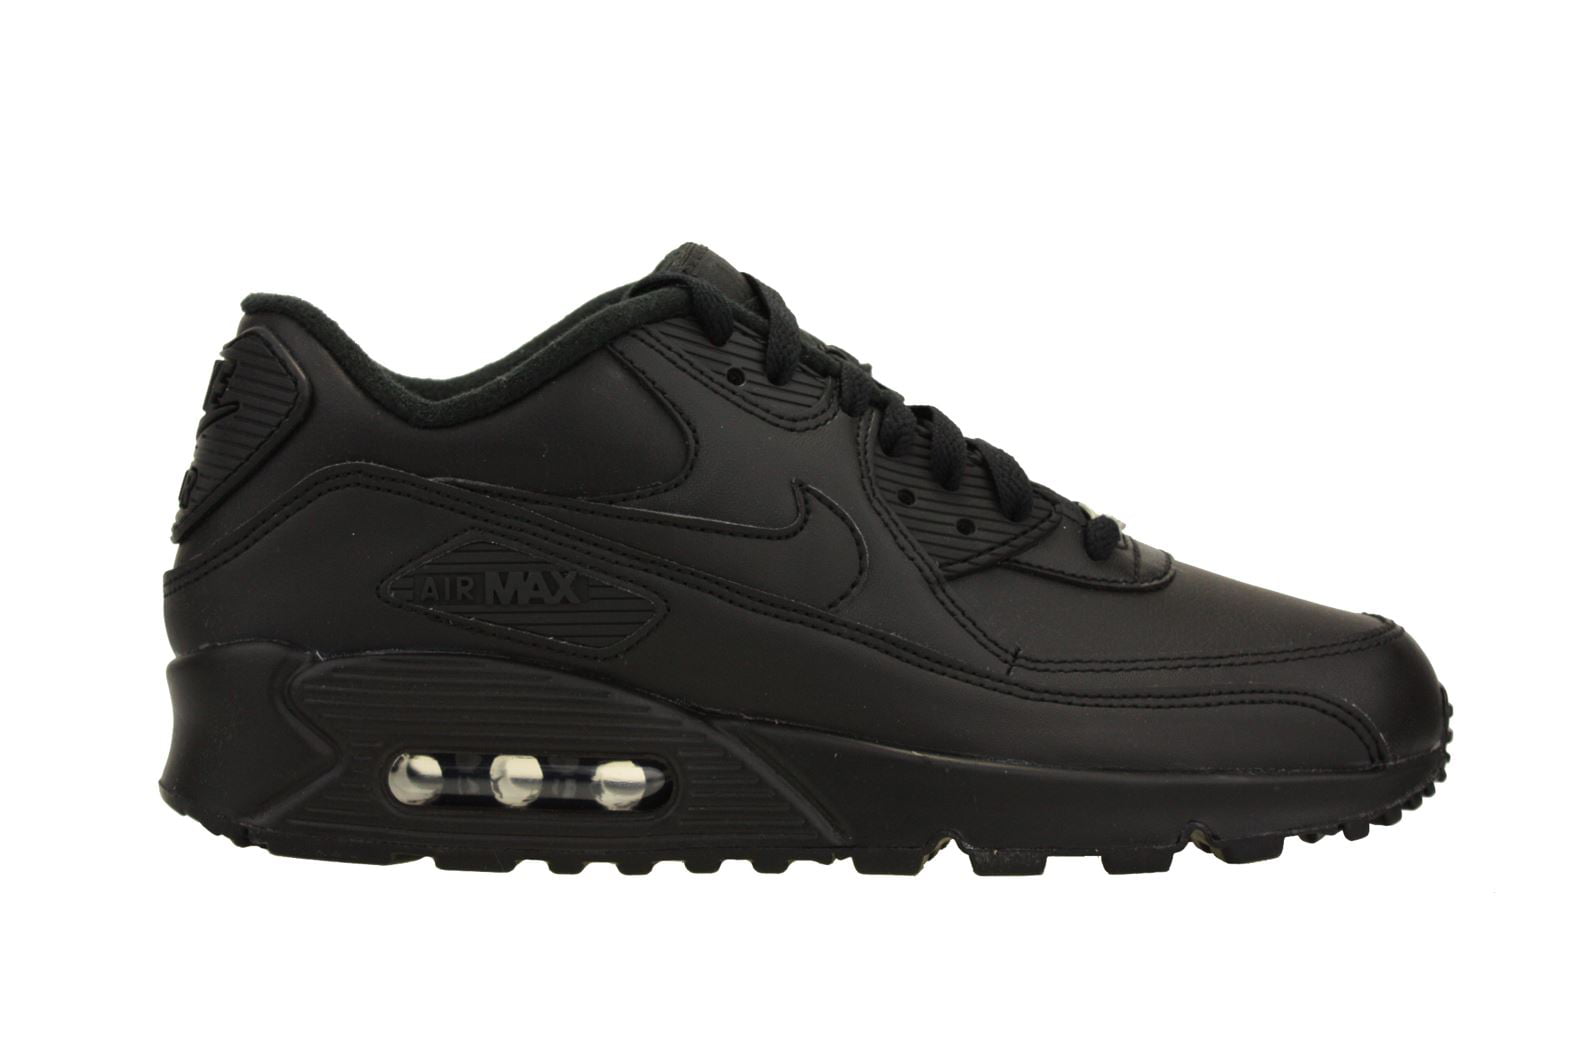 Nike Mens Air Max 90 Leather Running Shoes Black/Black 302519-001 Size 10